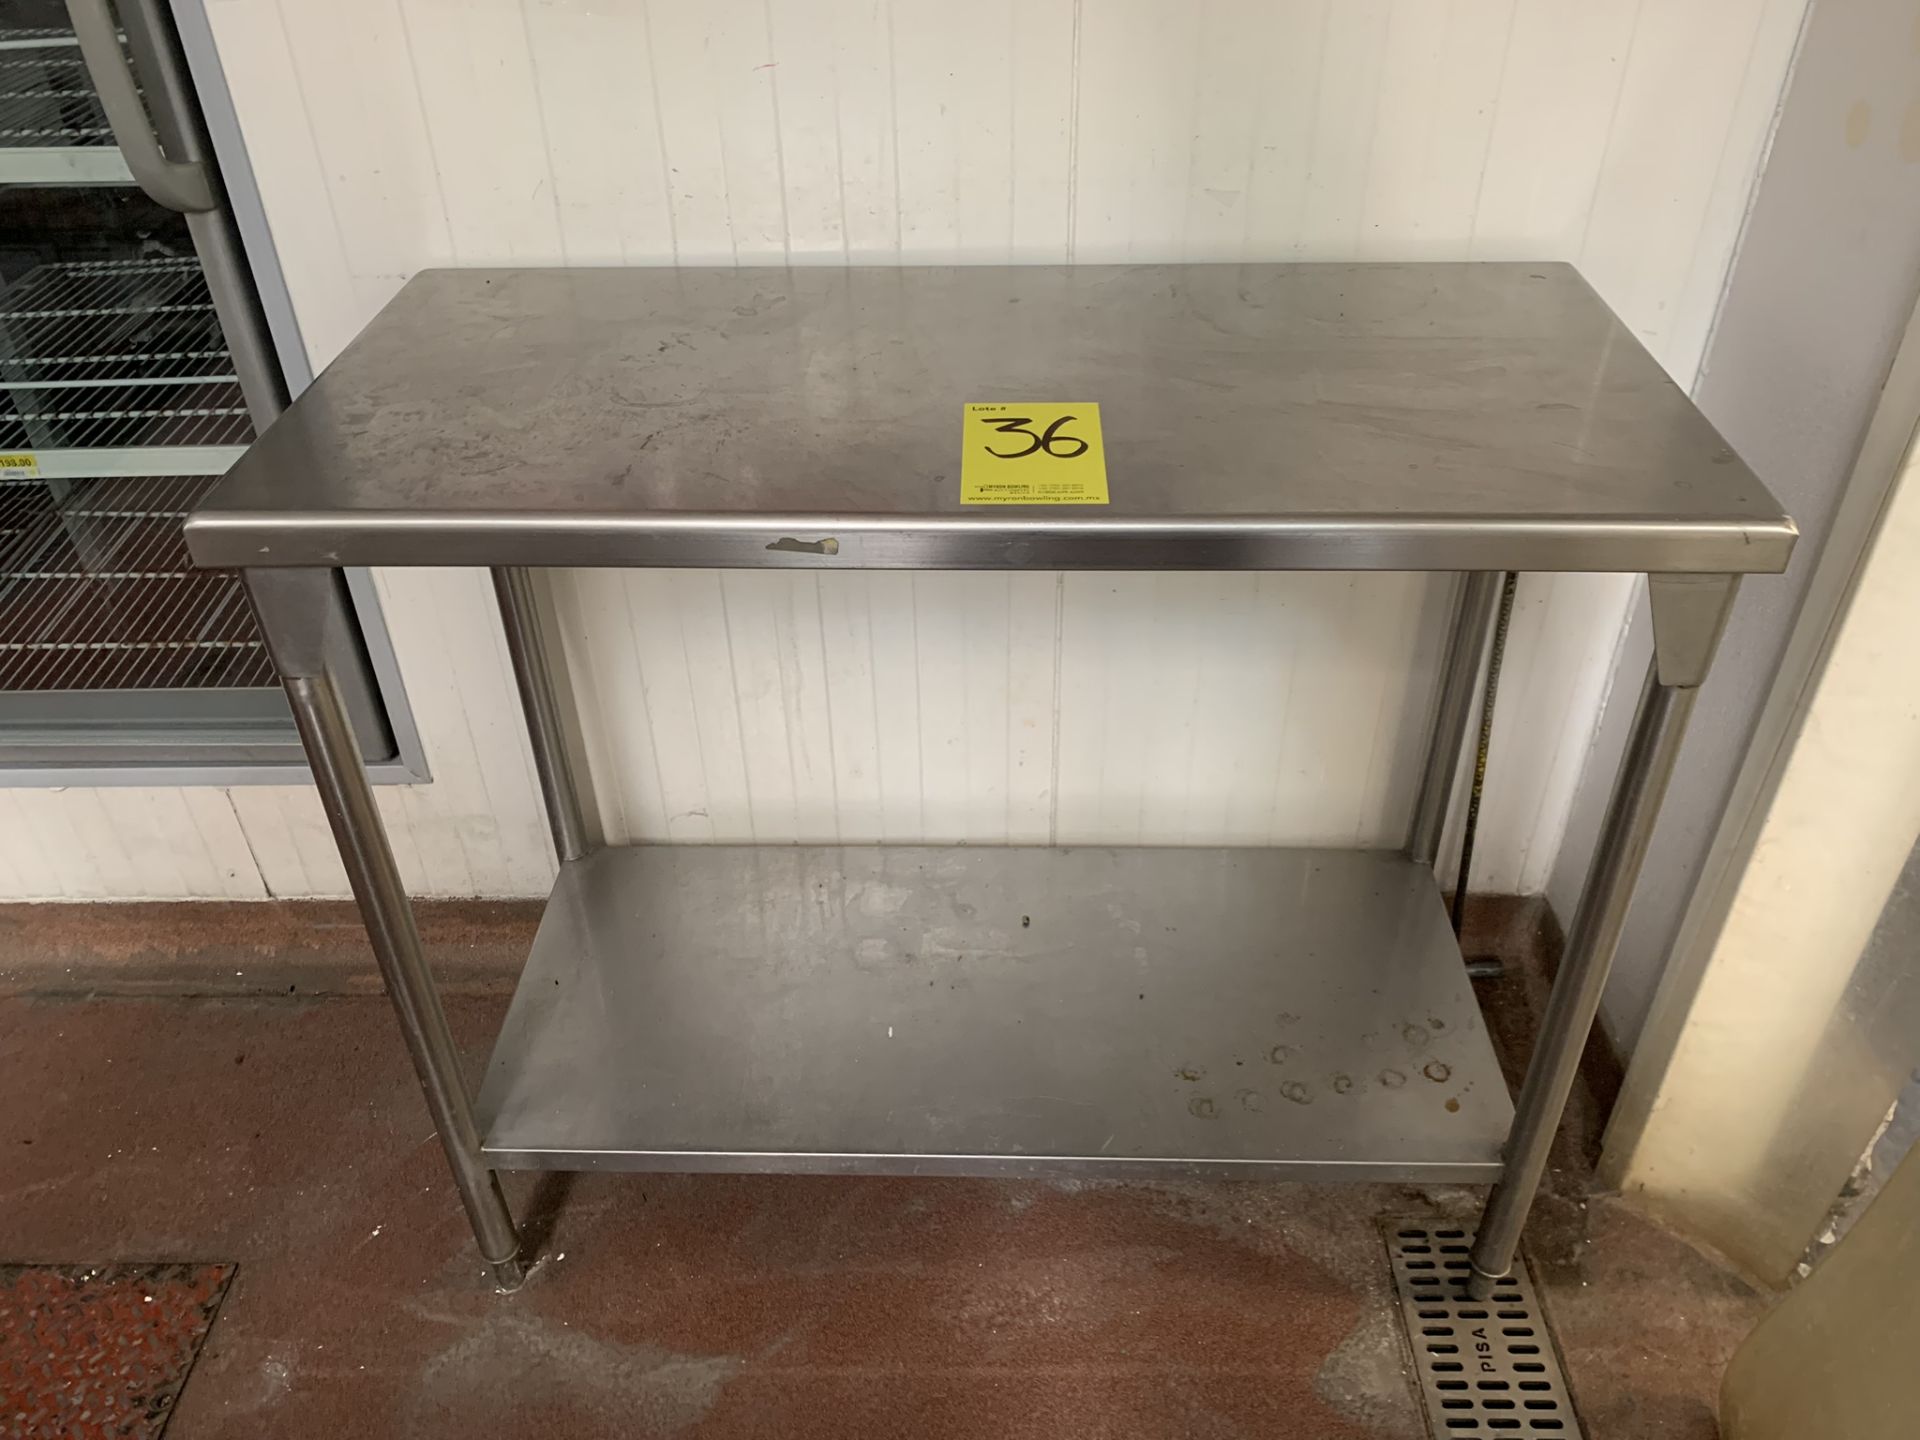 1 Stainless steel work table measures 1.10 x 0.50 x 0.90 mts